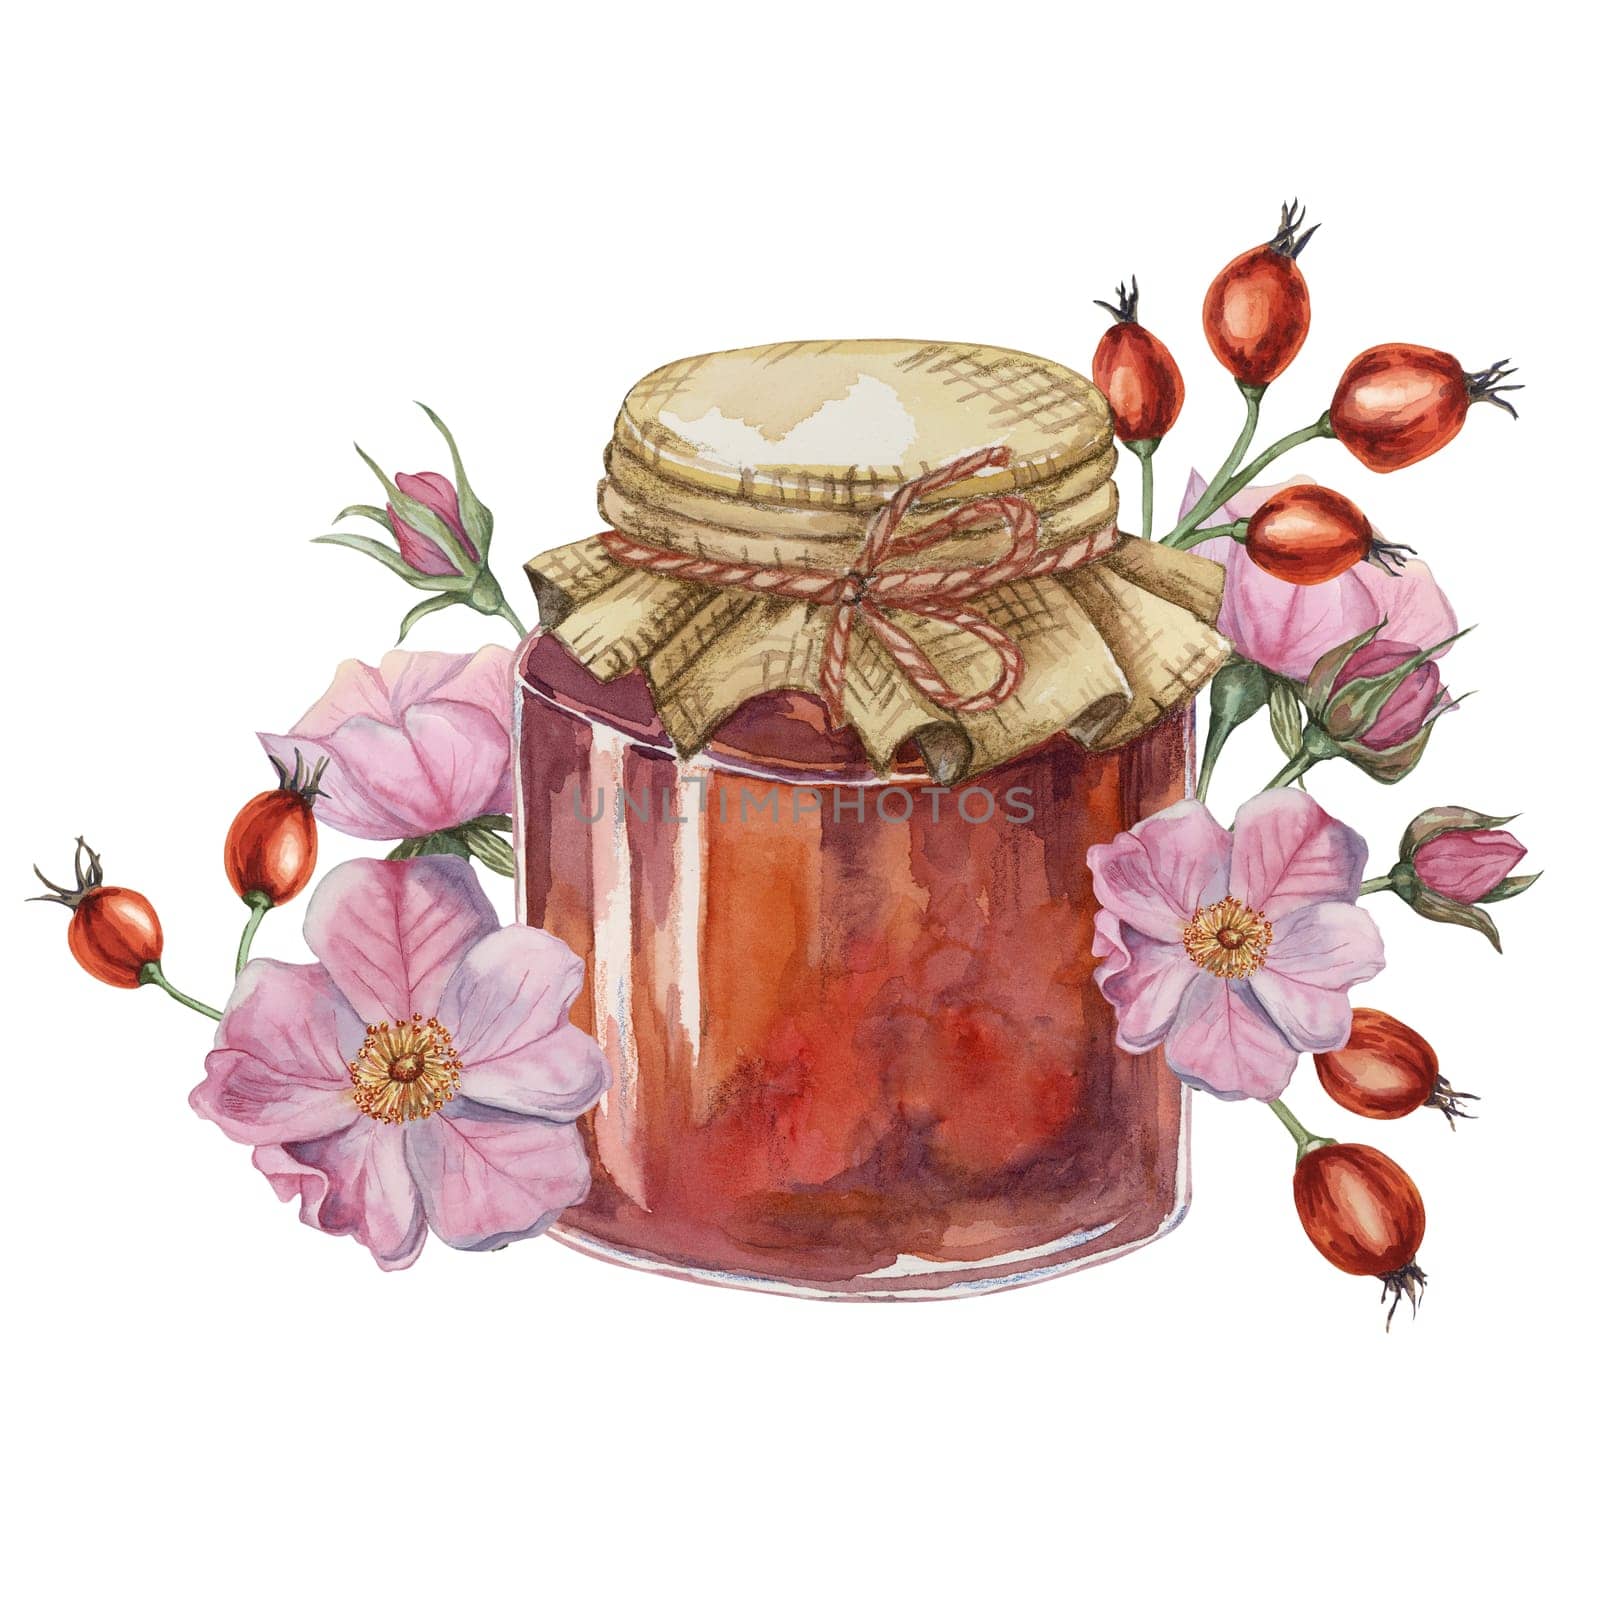 Rose hip jam in glass jar with canvas burlap fabric lid and twine rope bow. German fruit preserve jelly watercolor illustration for printing, food packaging, labels, cards, stickers, scrapbooking